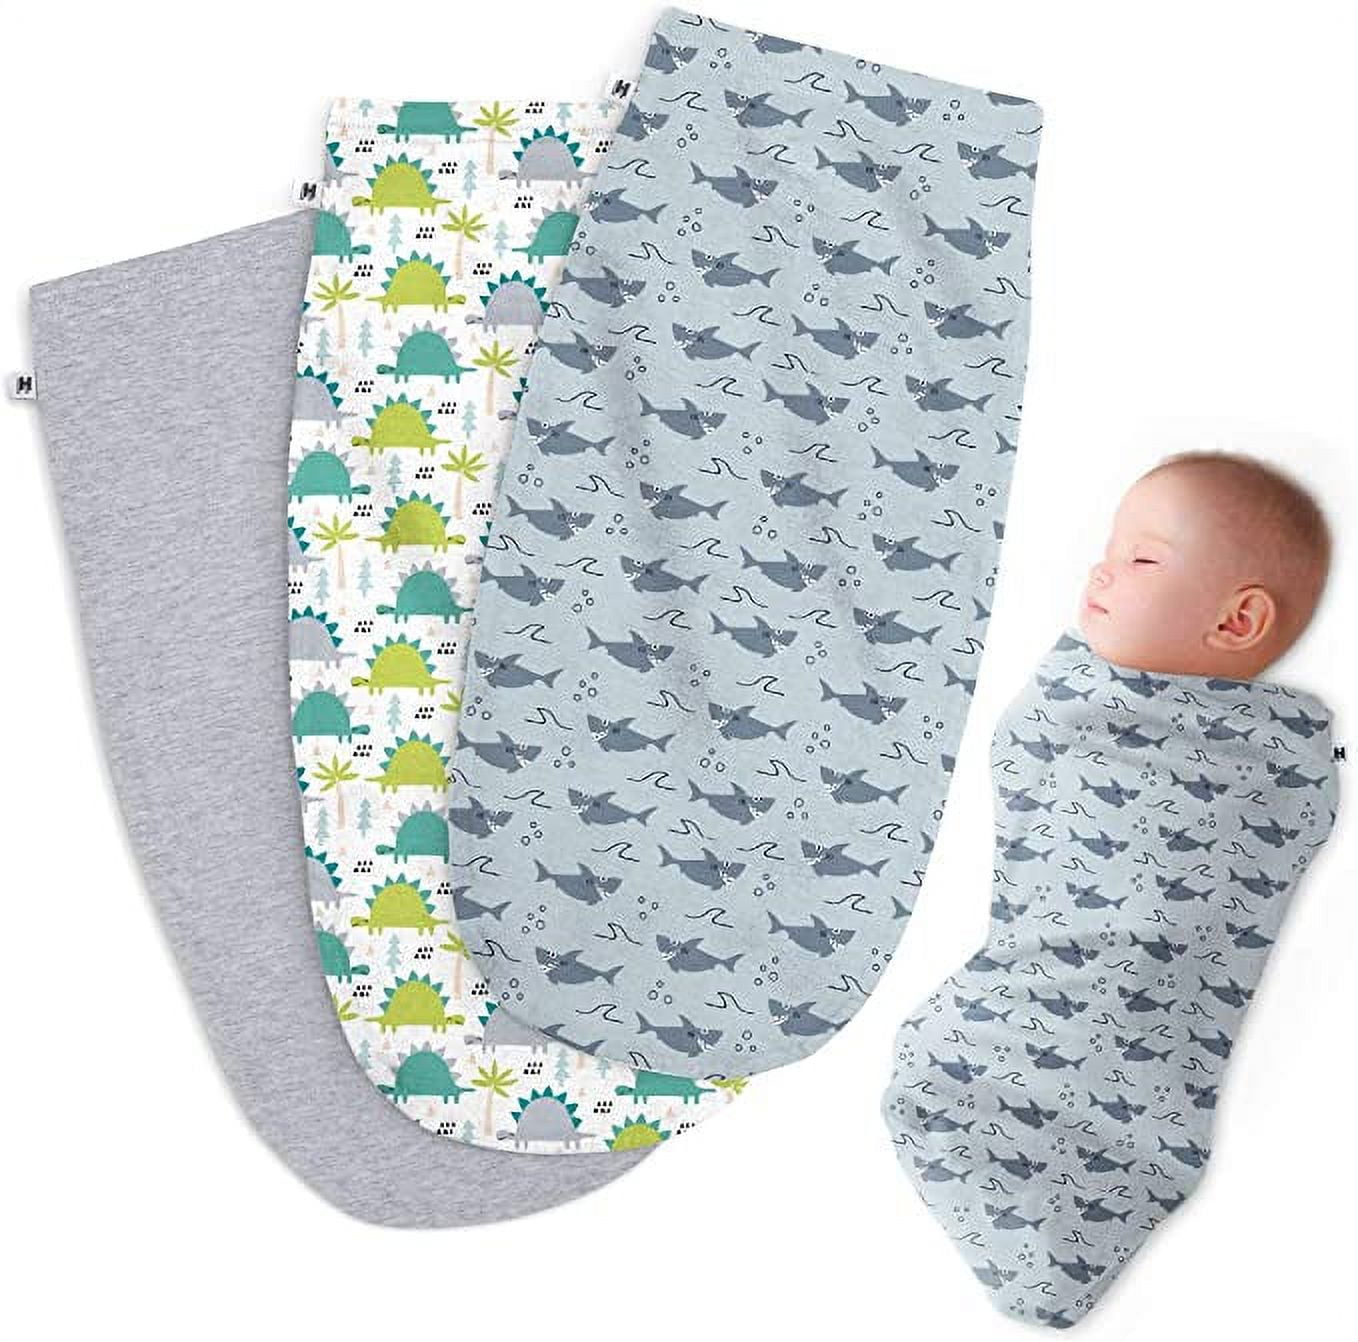 Baby Products Online - Little Seeds baby swaddle blanket 0-3